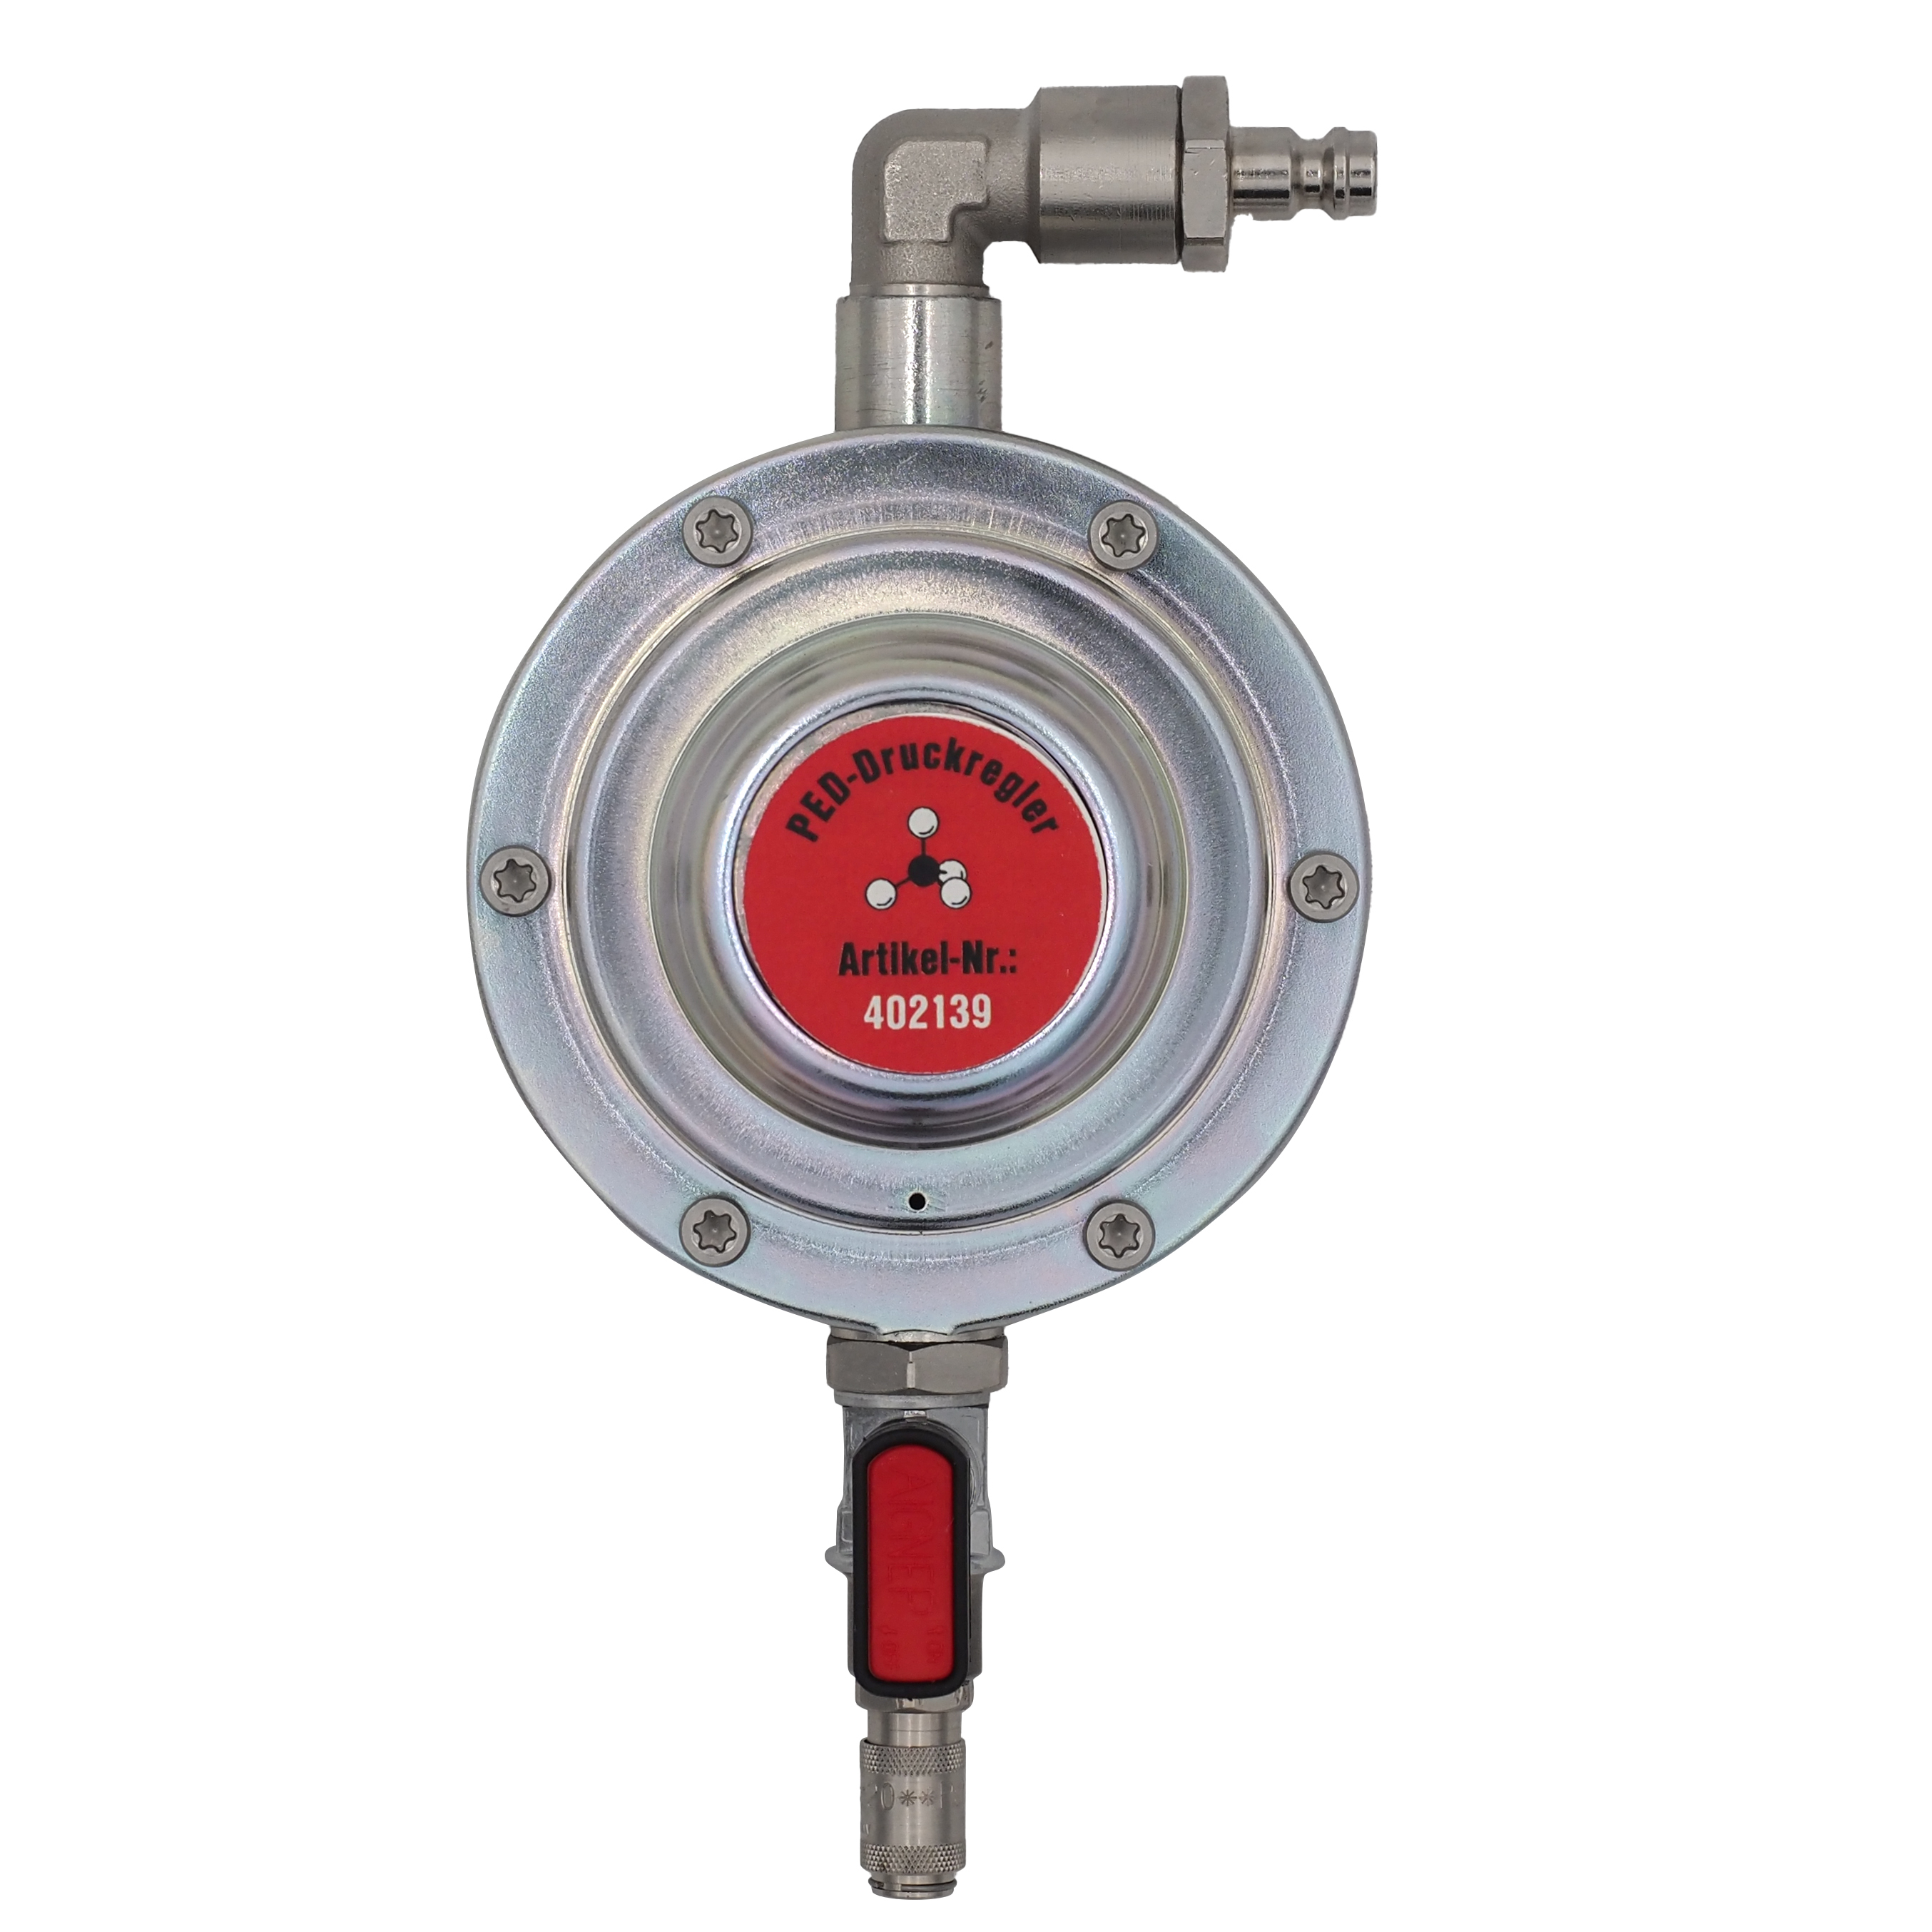 Adapter GS Pressure measurement for measuring the residual gas concentration in gas pipe lines